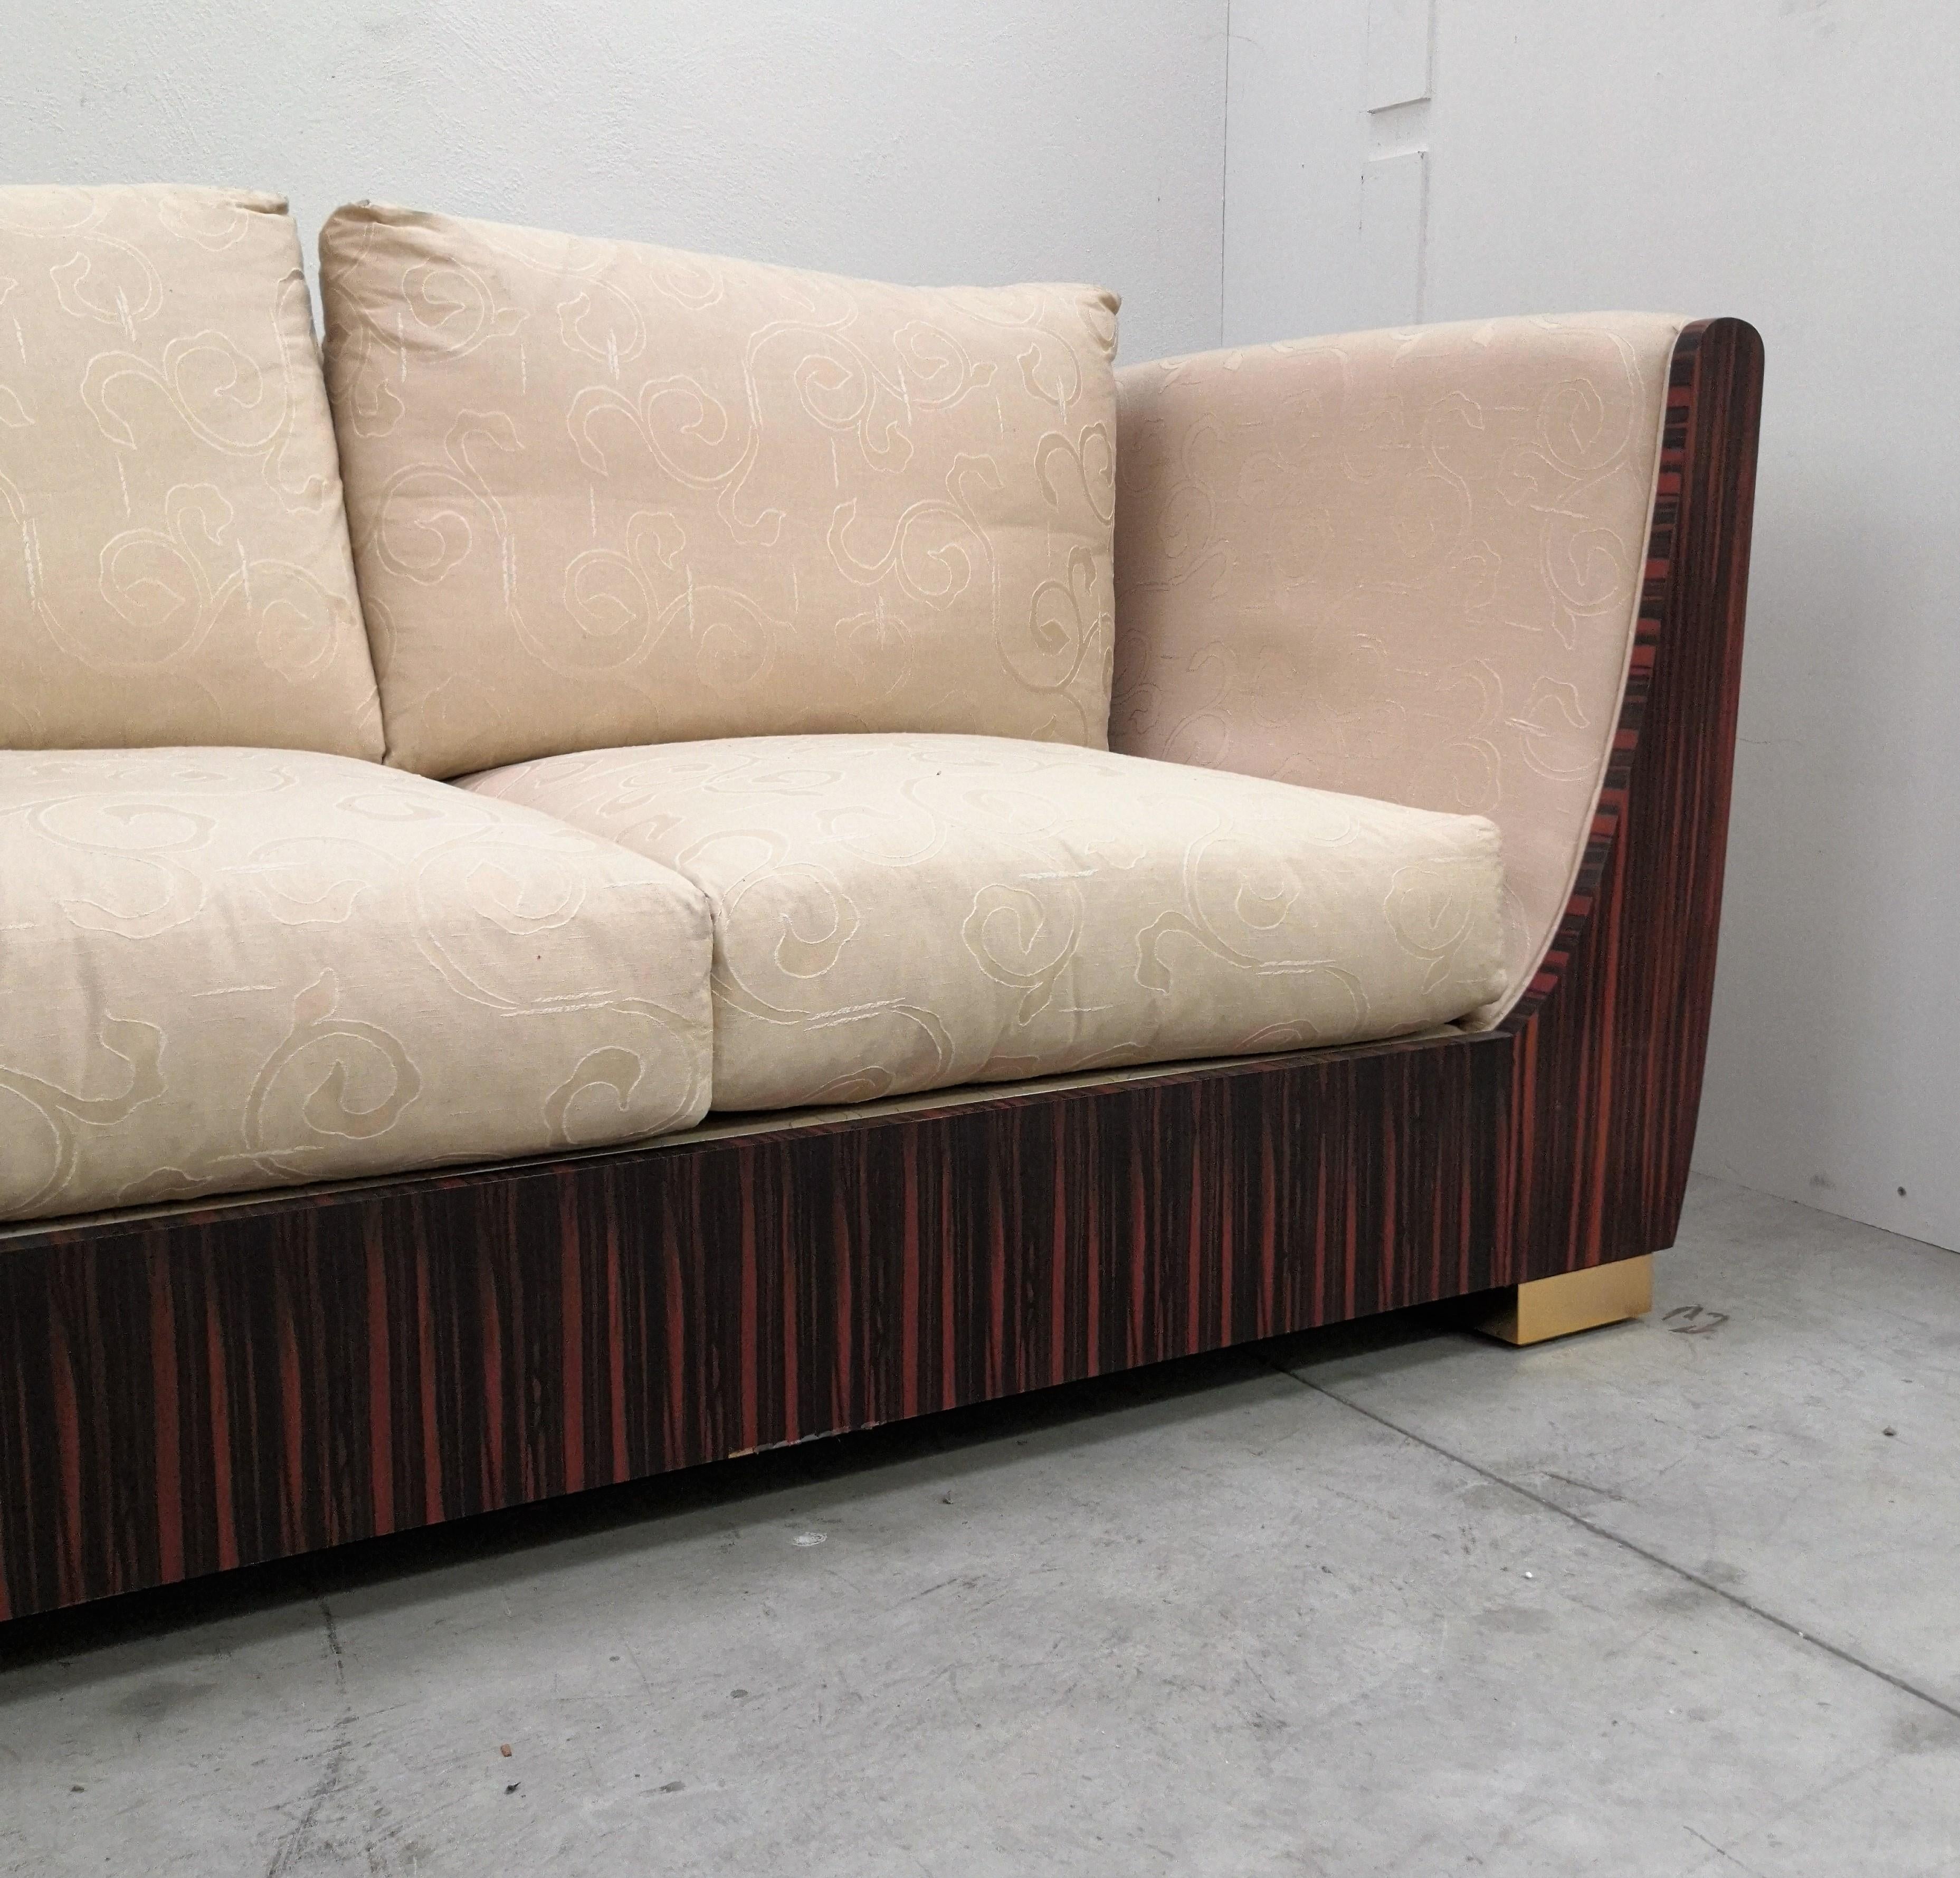 Beautiful and stylish Italian Art Deco style Macassar ebony sofa. The cream and beige textiles contrast beautifully with the polished wood and lacquered furniture common to typical Art-Deco design. We do have one piece of the three-seat version